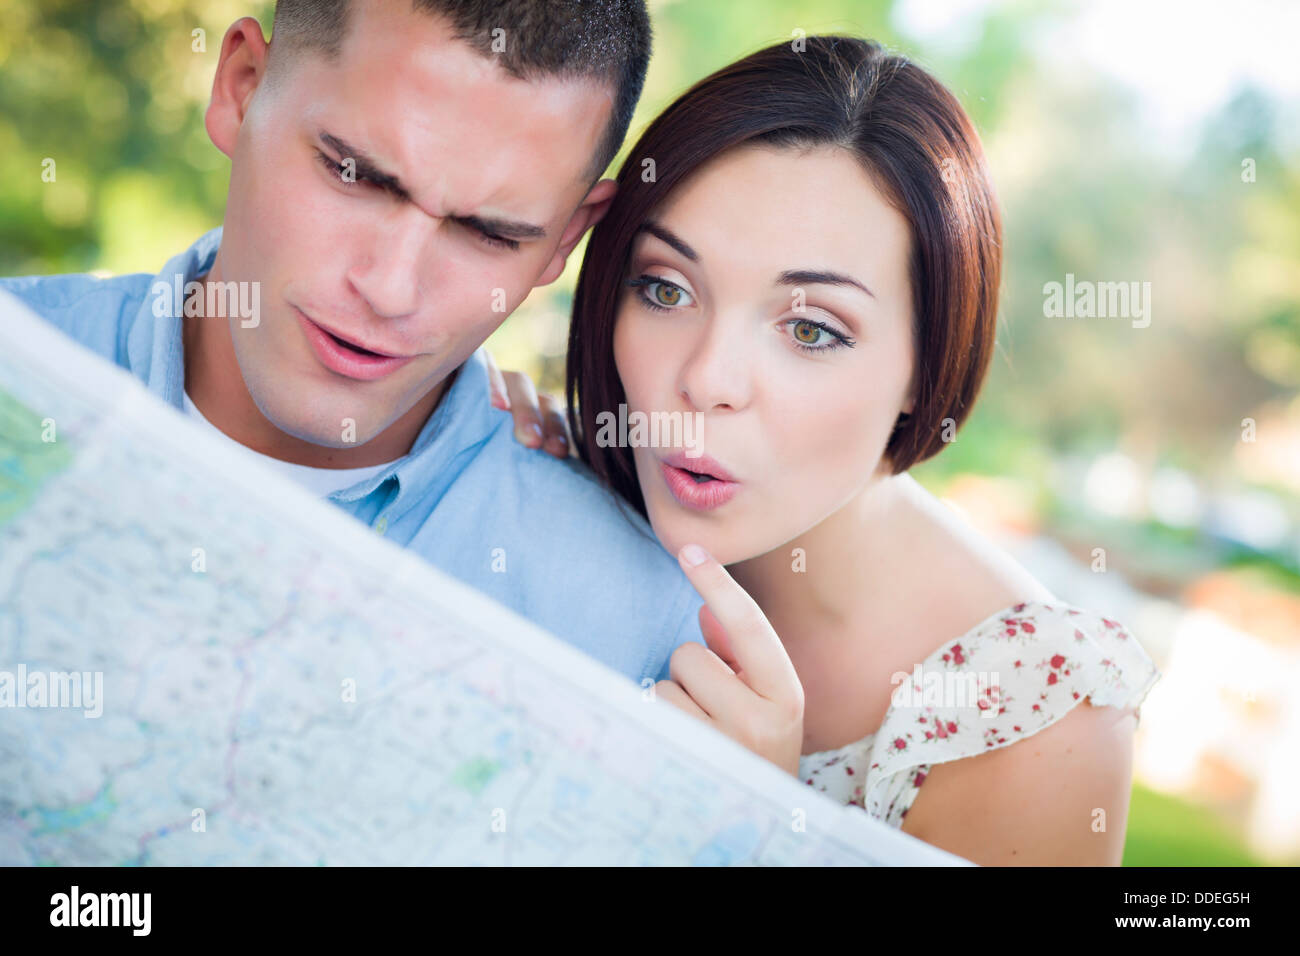 Happy Mixed Race Couple Looking Over A Map Outside Together. Stock Photo